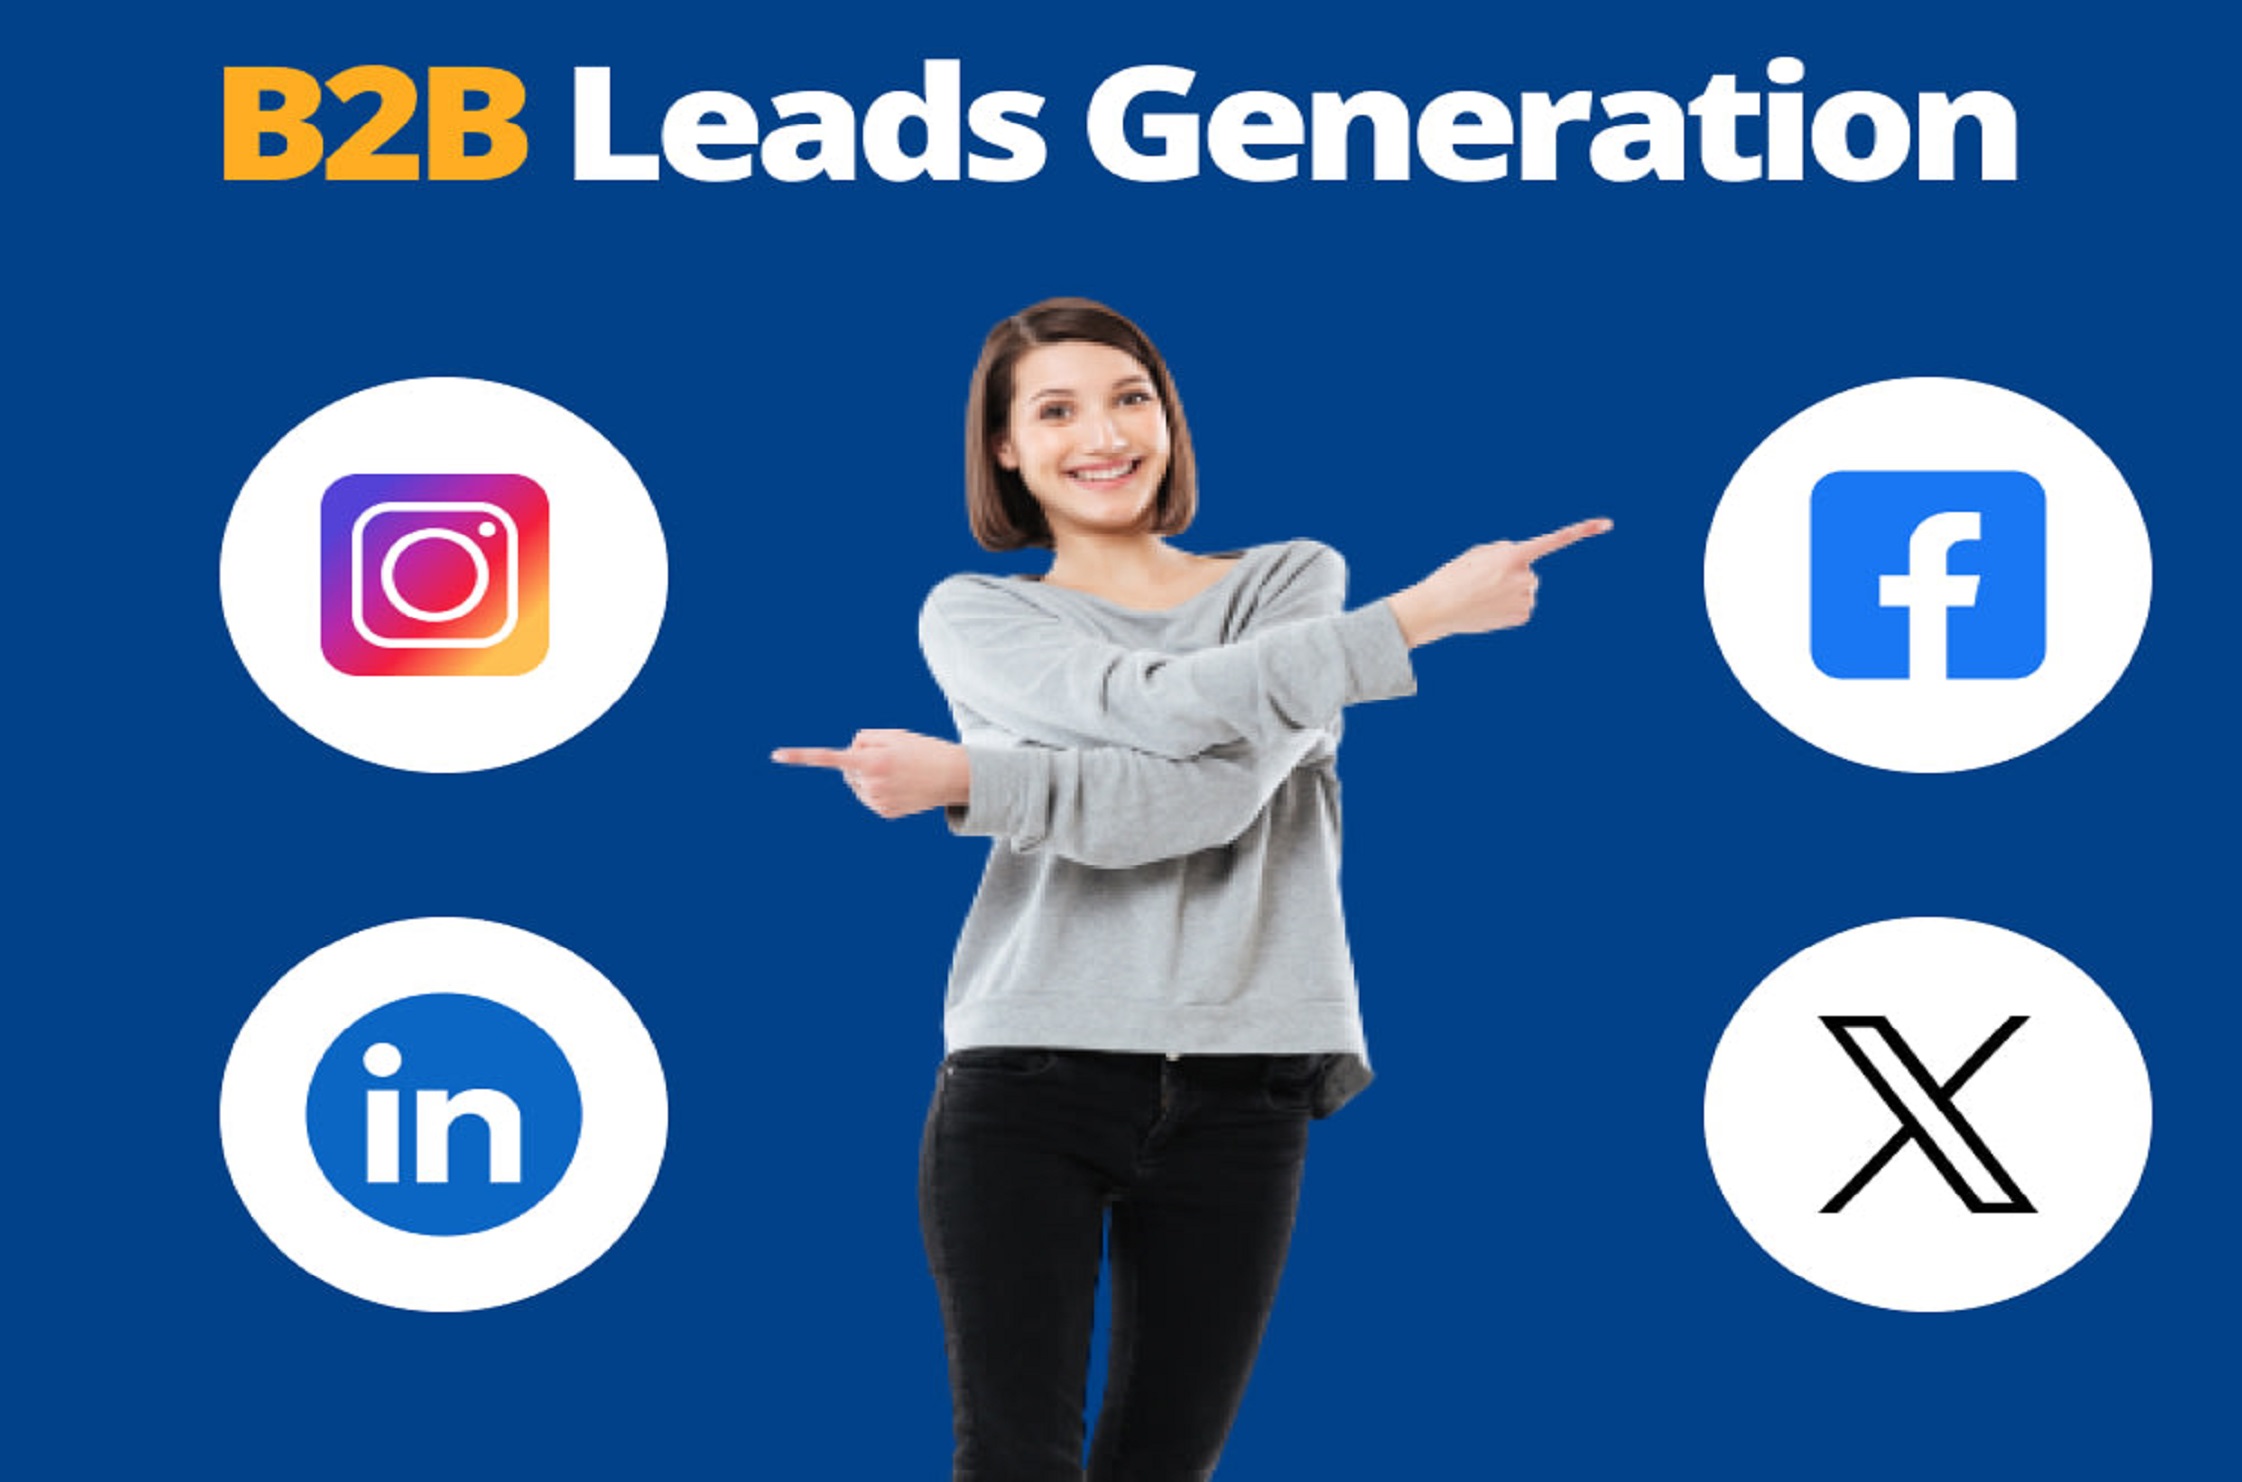 B2B Leads Email Prospects Lists and LinkedIn Profiles